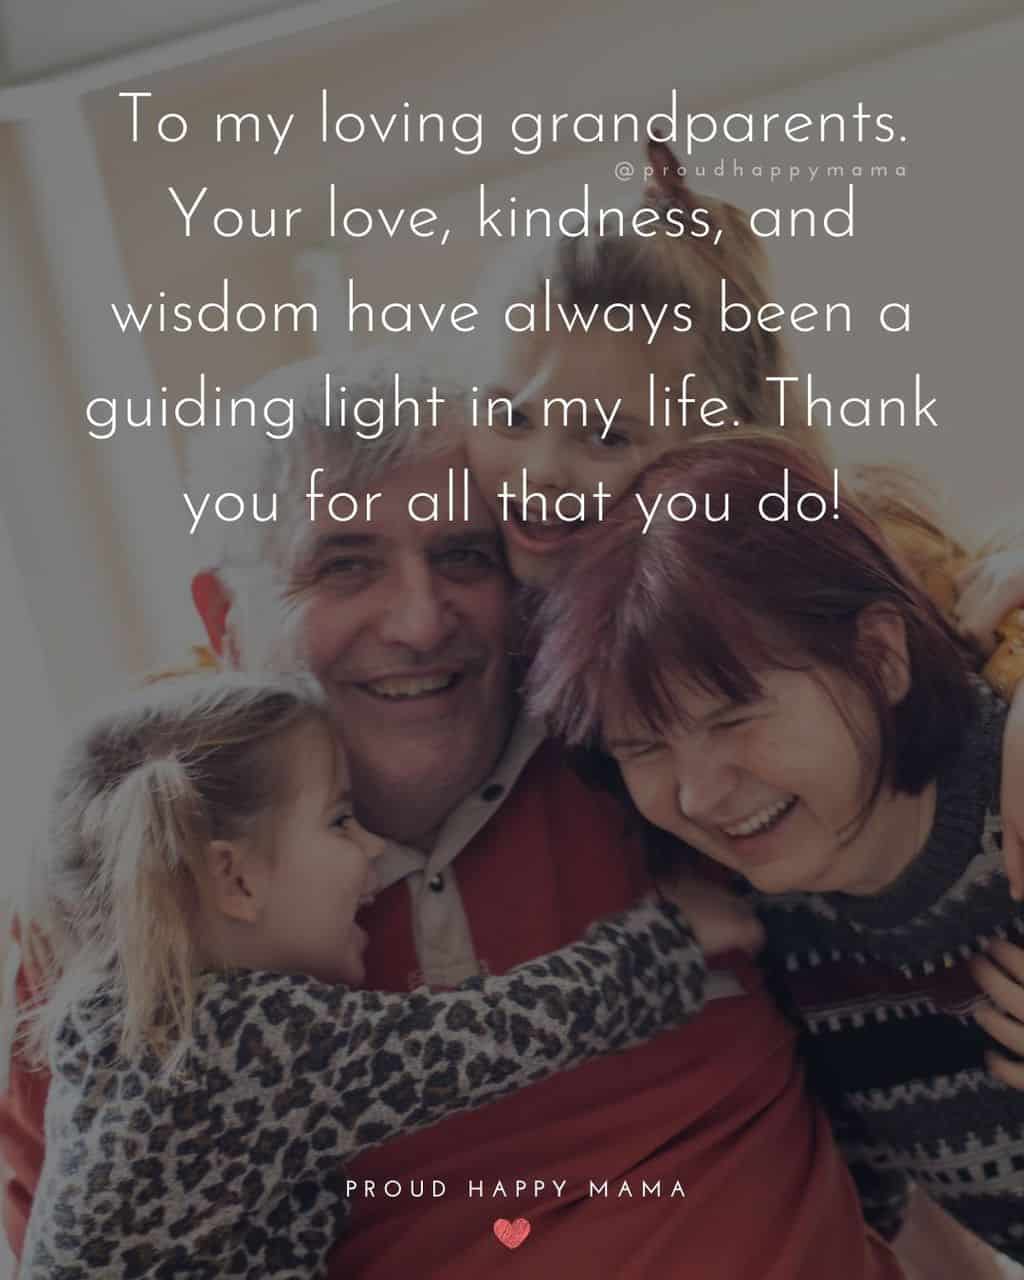 Grandparent Quotes – To my loving grandparents. Your love, kindness, and wisdom have always been a guiding light in my